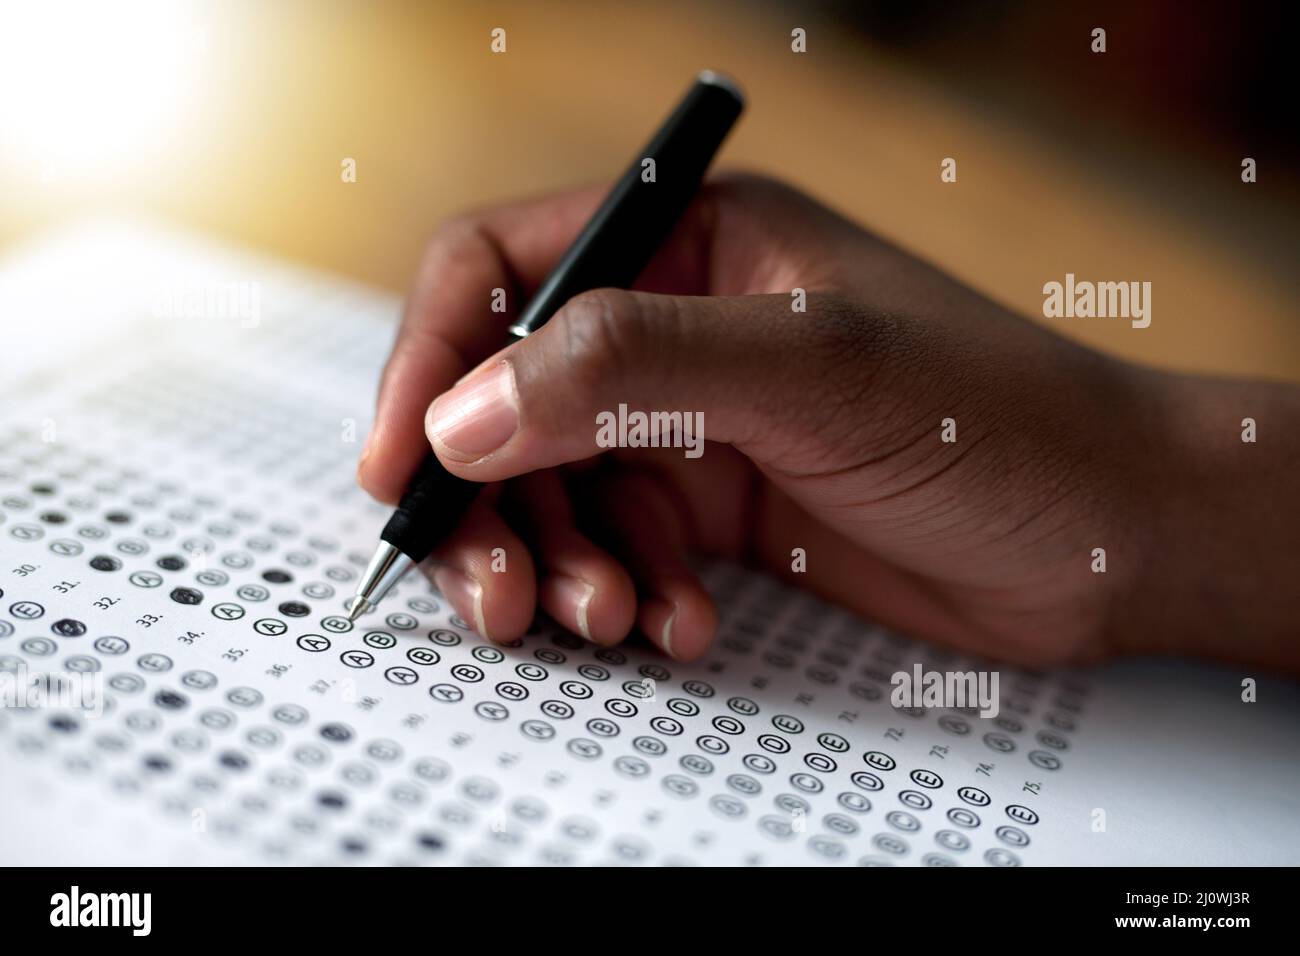 Making his choices. Cropped shot of a person filling out a multiple choice questionnaire. Stock Photo